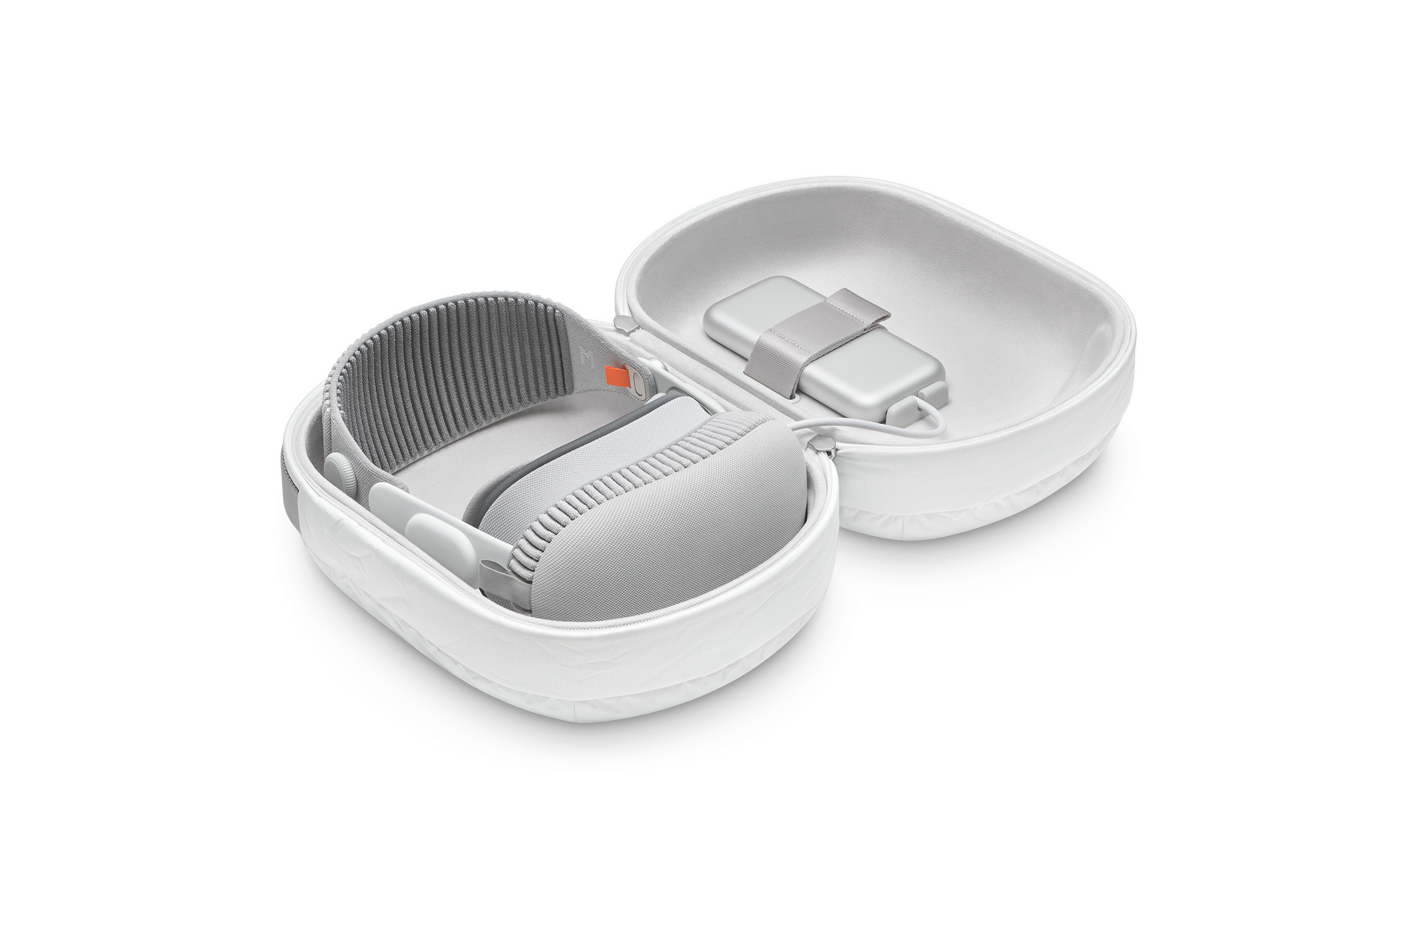 Interior, open oval Travel Case containing Apple Vision Pro assembled with Solo Knit Band, gray cover, Battery and Power Cable secured by strap